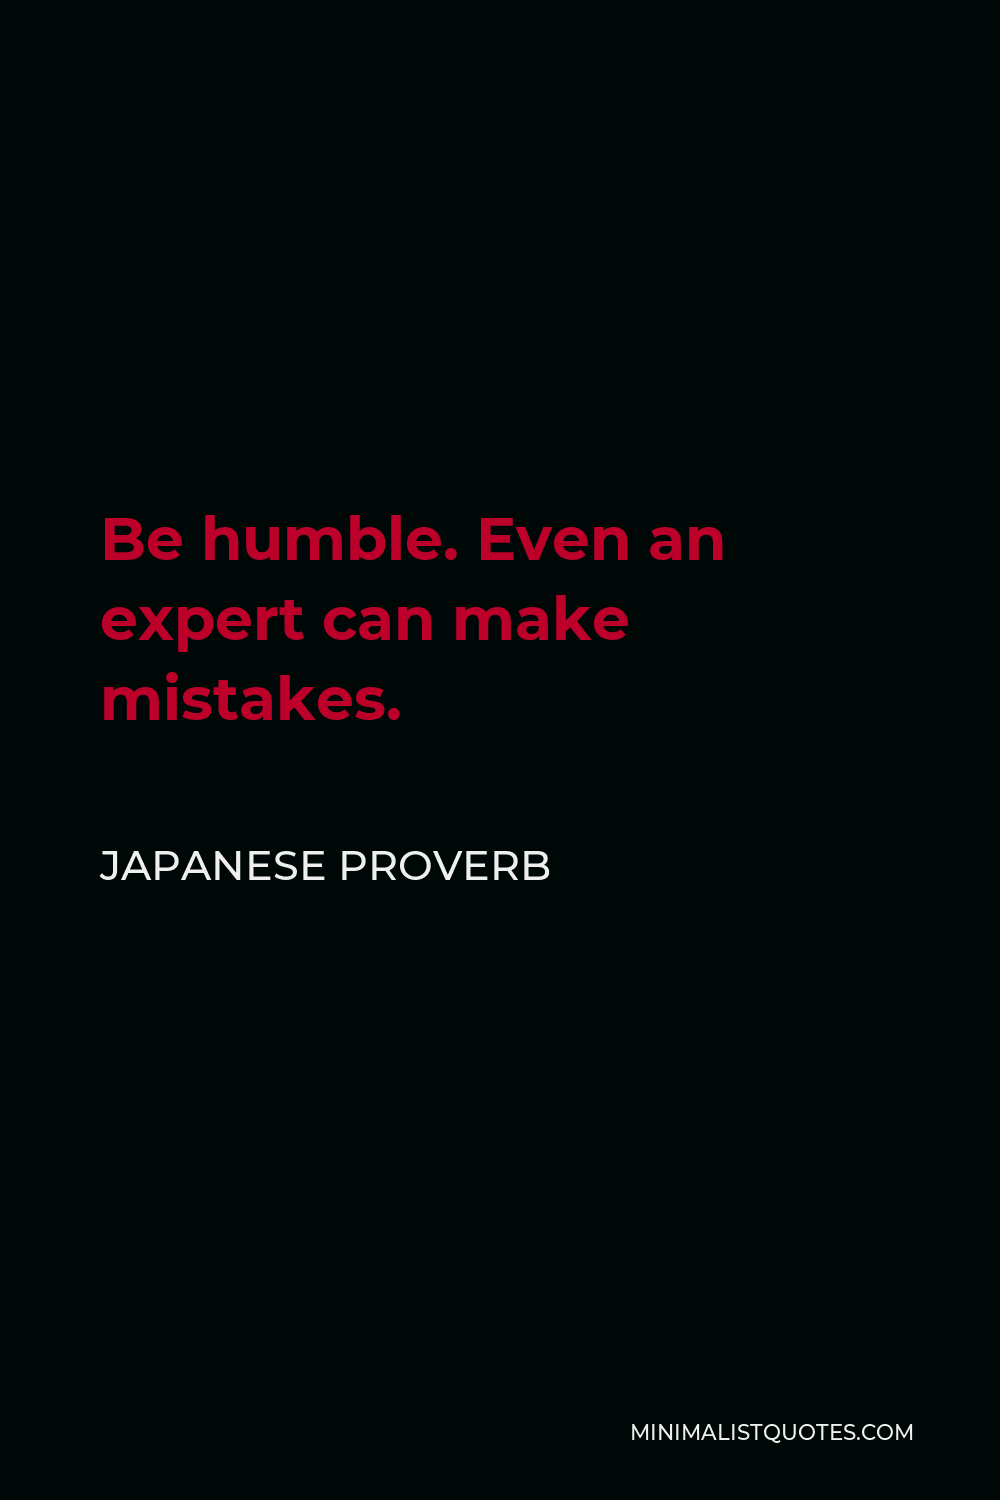 Japanese Proverb Quote - Be humble. Even an expert can make mistakes.